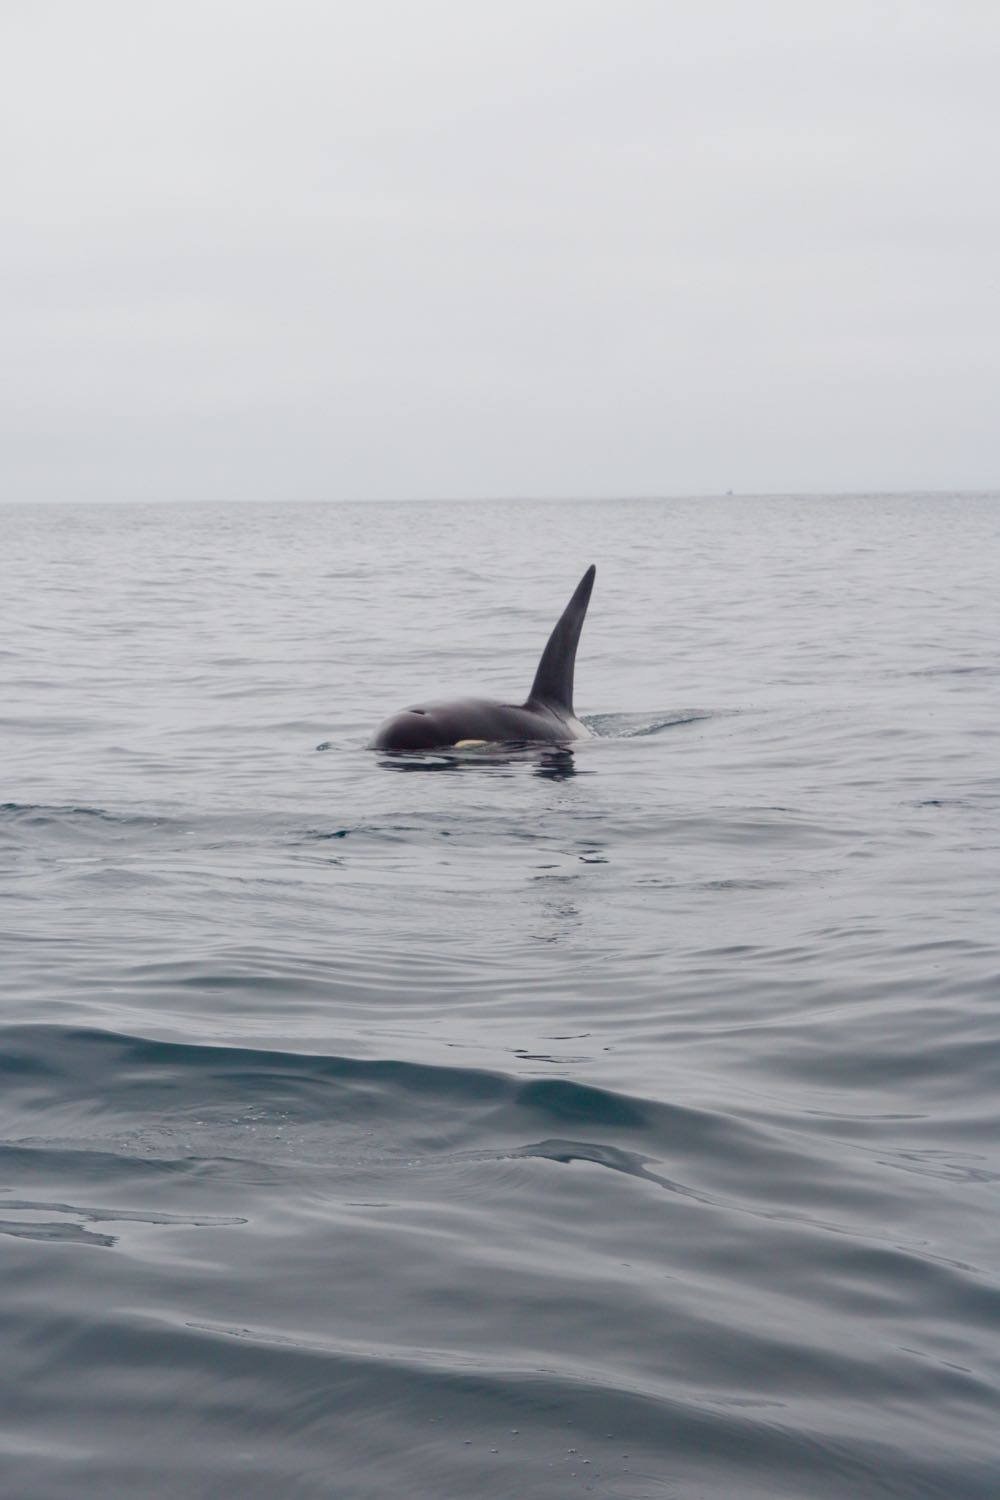 Amazing whale watching for orcas in Monterey Bay